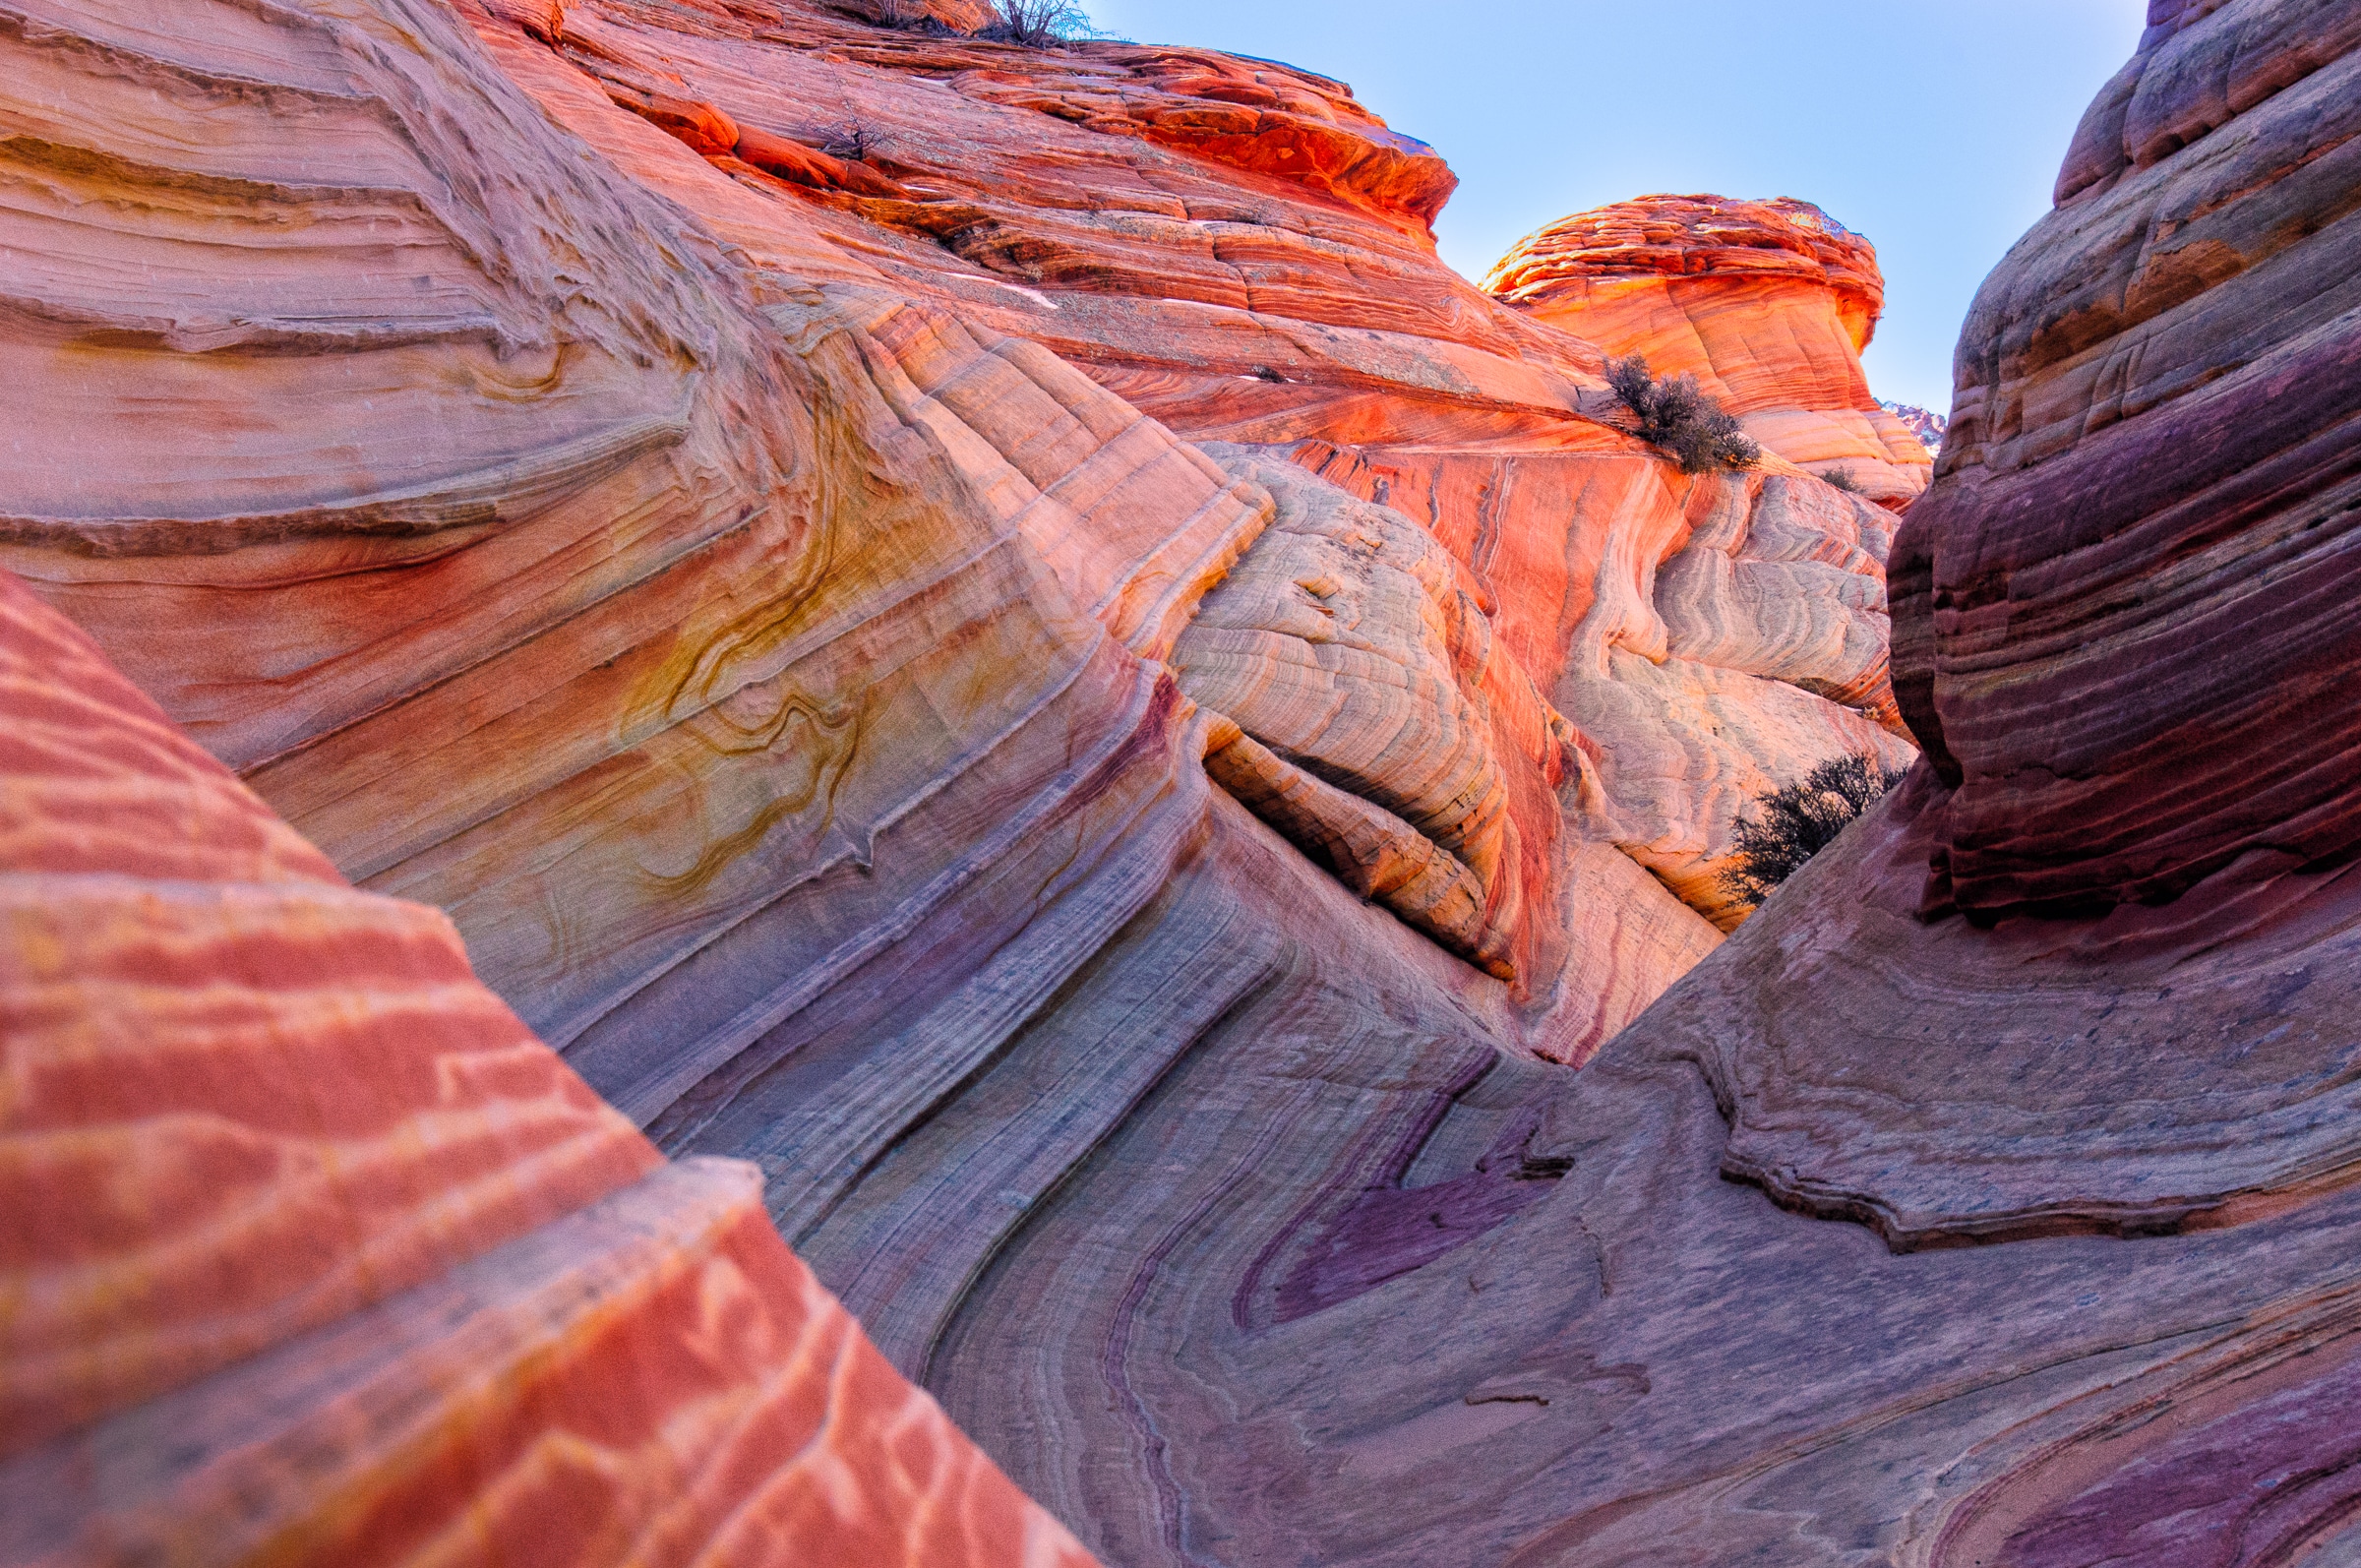 Sandstone strata at The Wave in the North Coyote Buttes area of the Vermillion Cliffs National Monument.